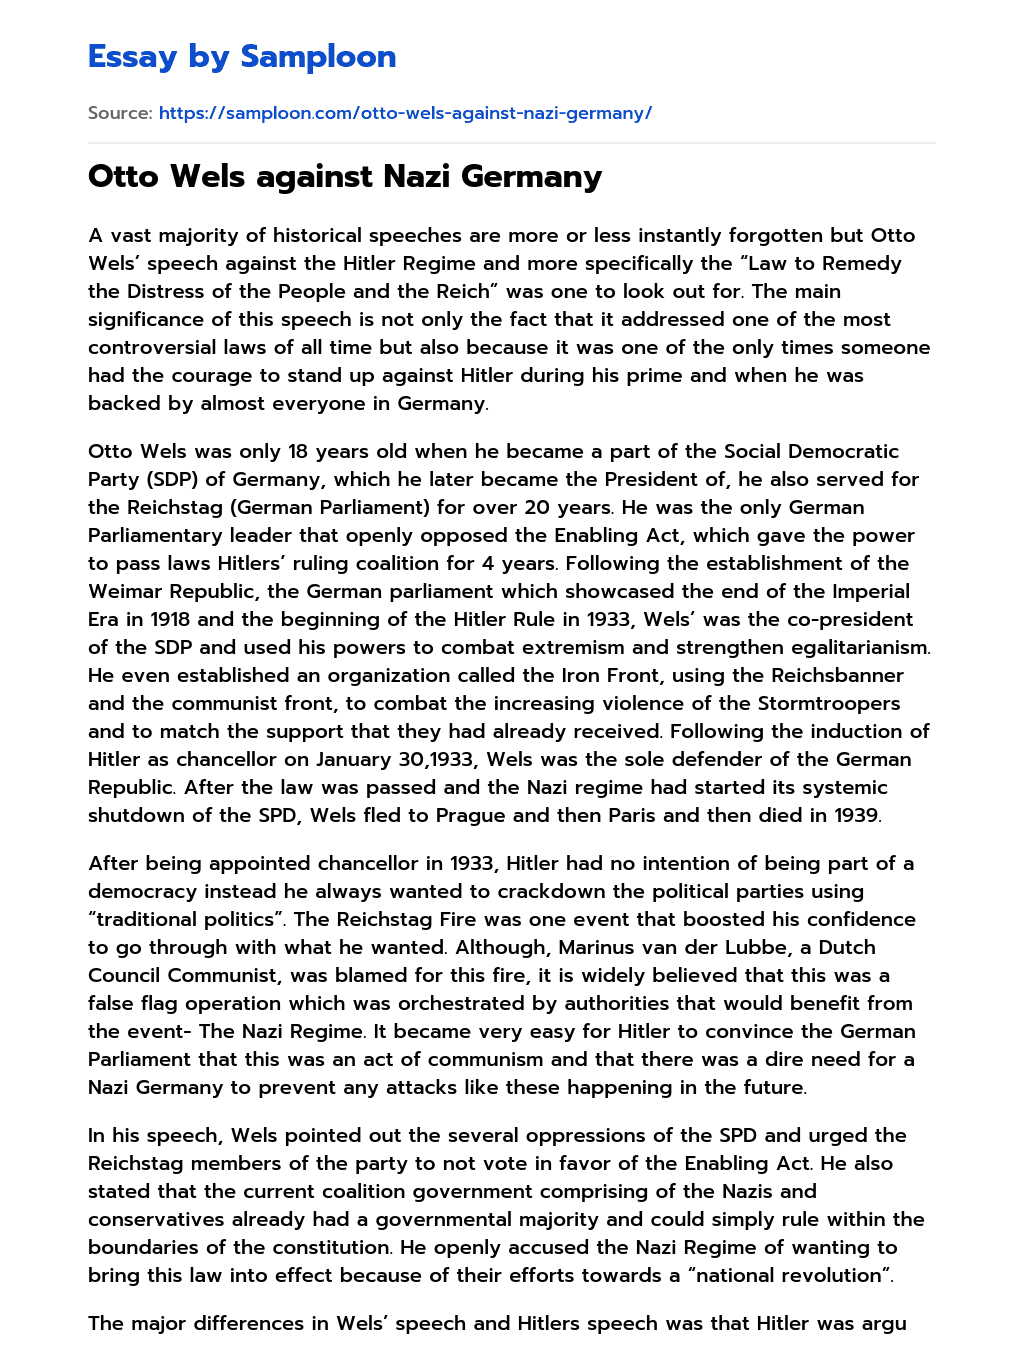 Otto Wels against Nazi Germany essay